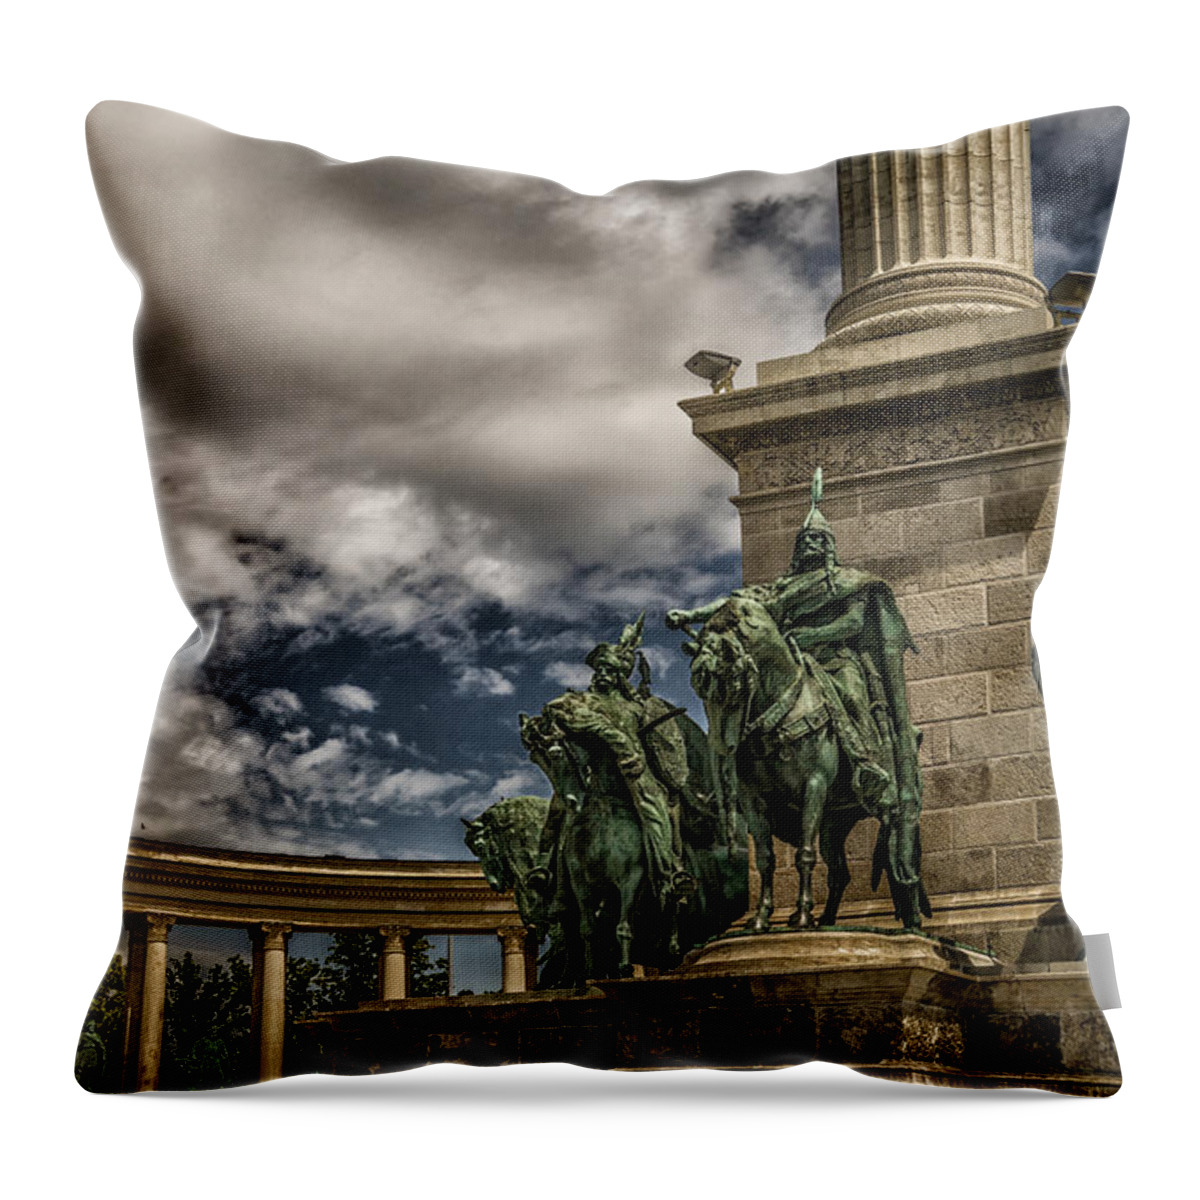 Chieftains Throw Pillow featuring the photograph The Chieftains Budapest by Janis Knight